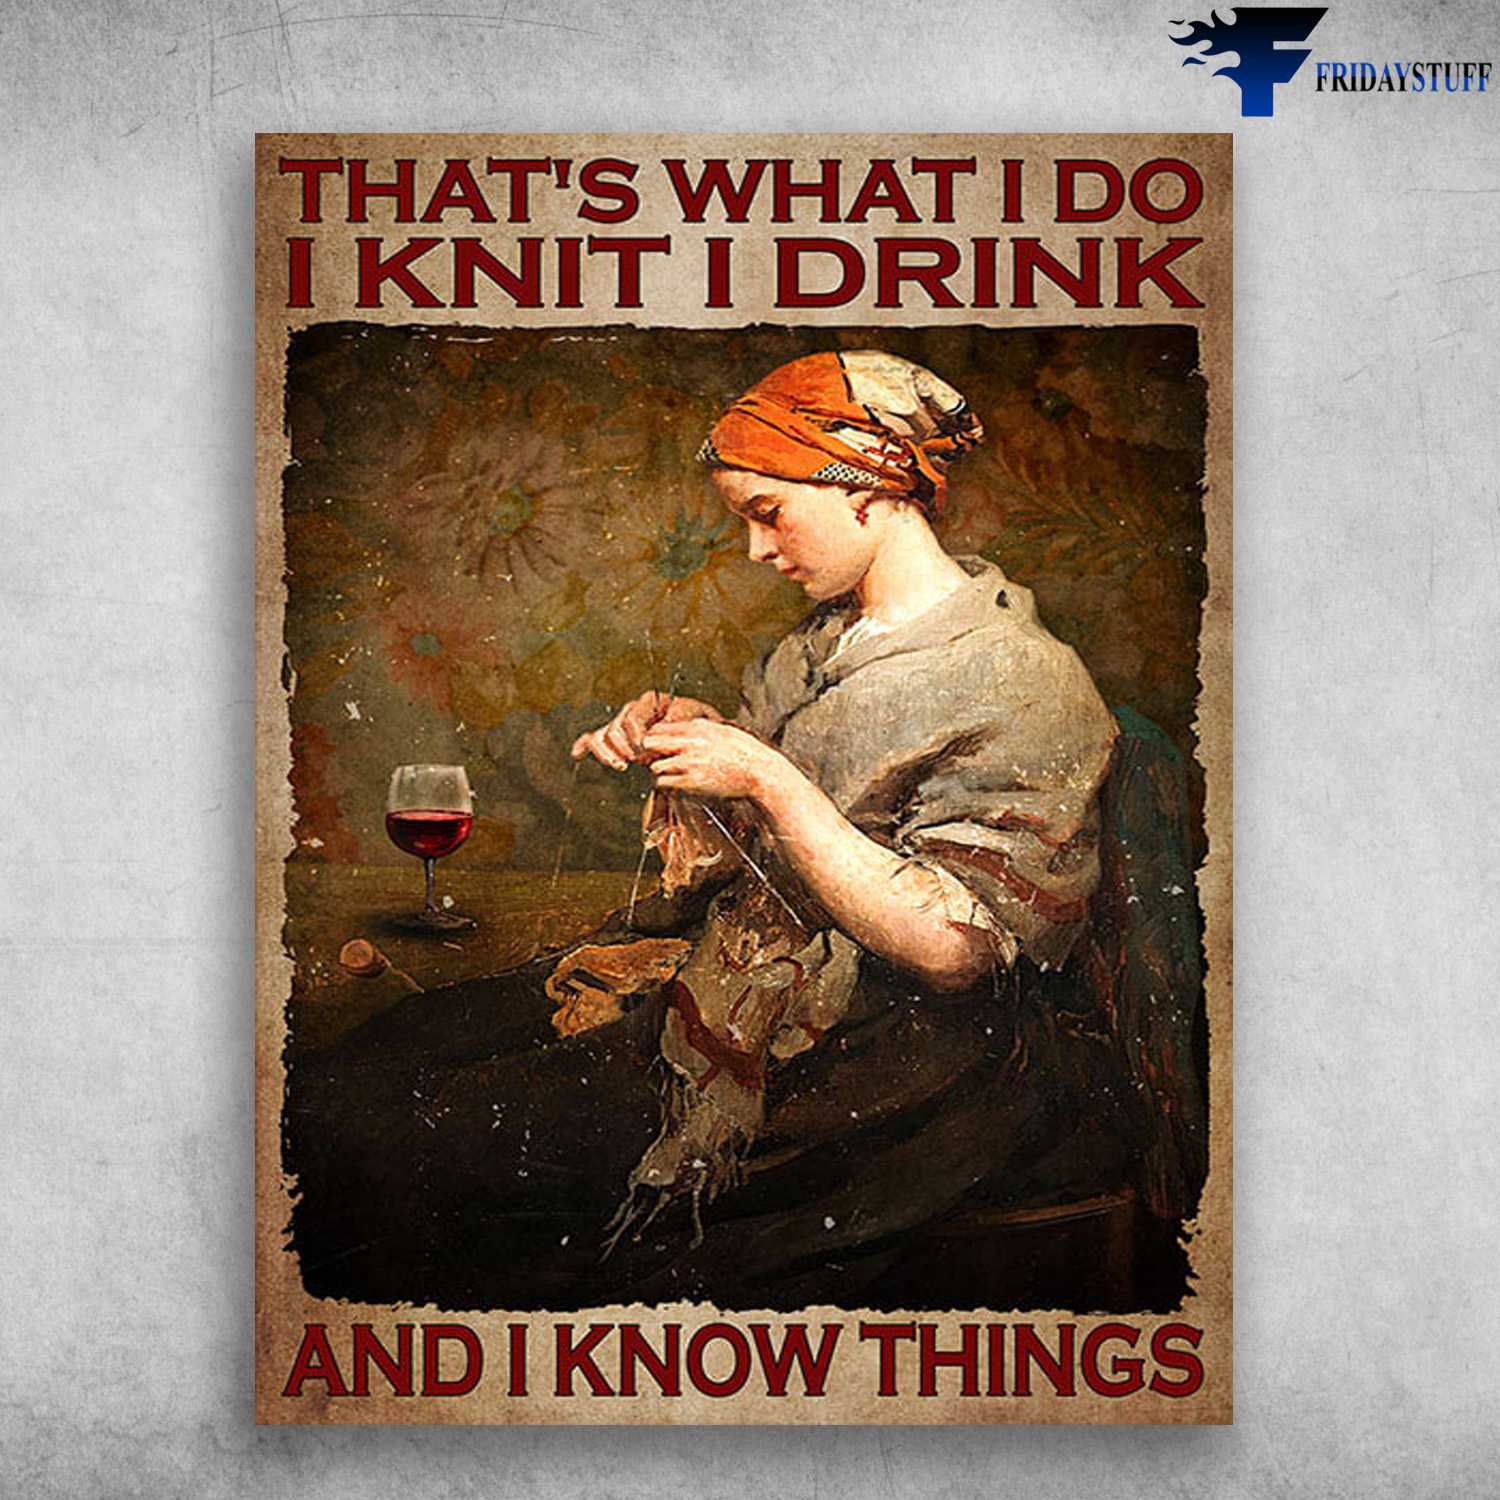 Kniting Girl, Wine Poster - That's What I Do, I Knit, I Drink, And I Know Things